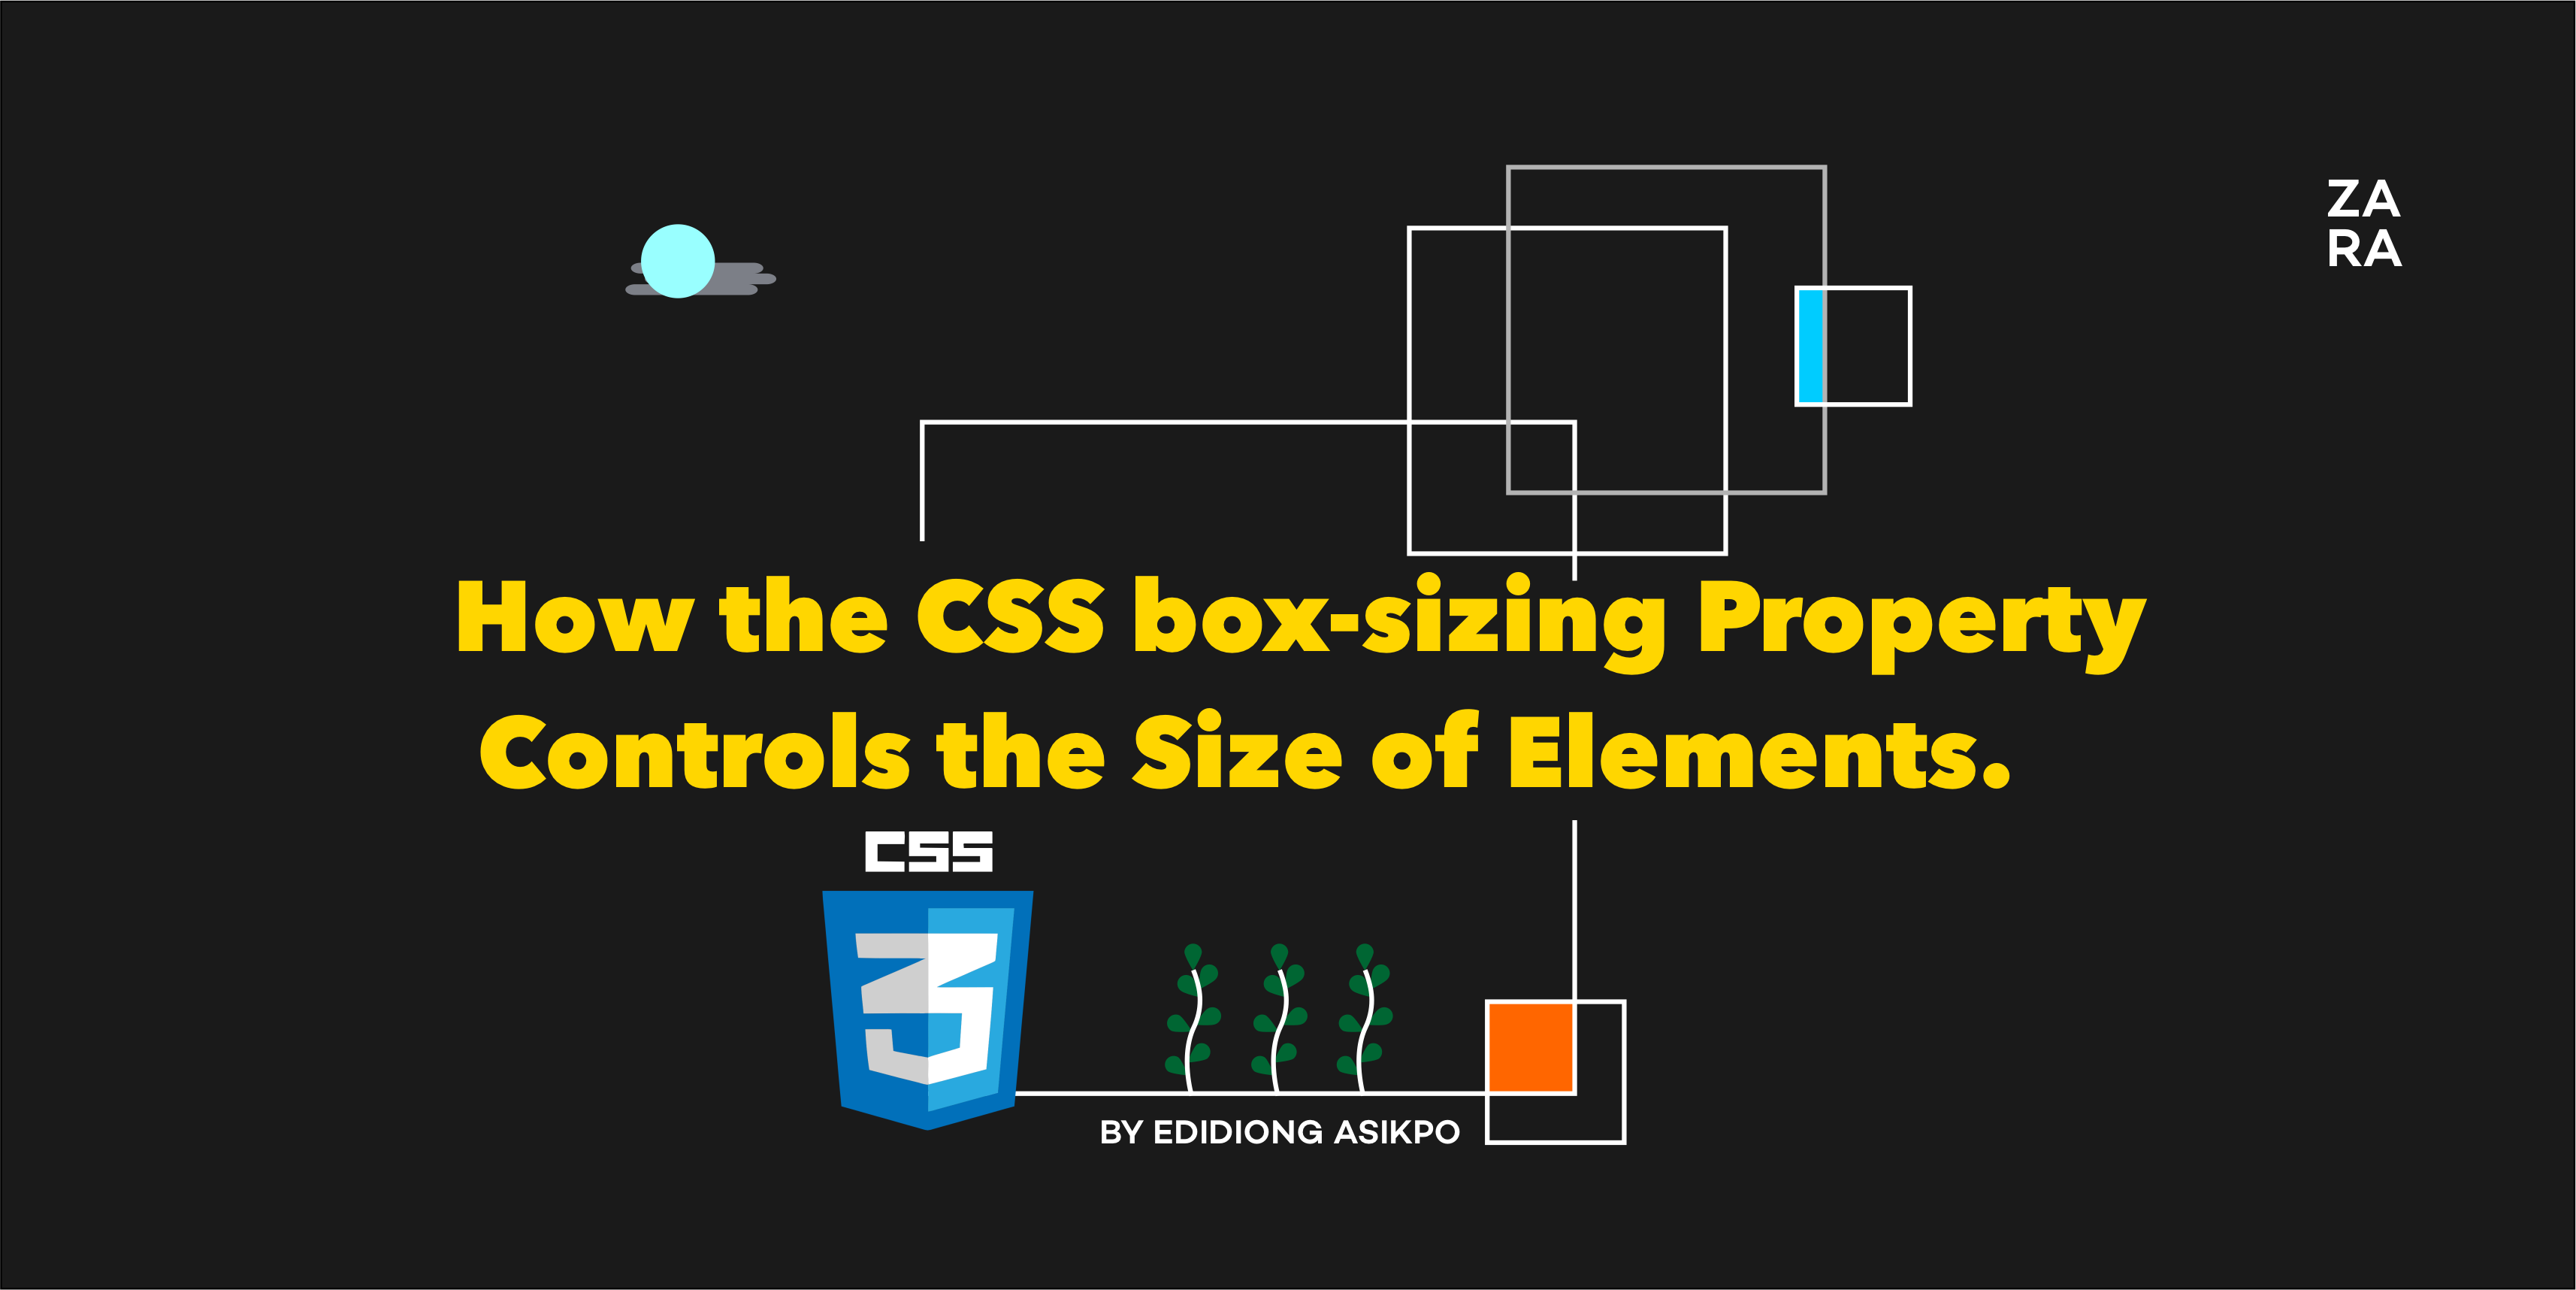 How the CSS Box-sizing Property Controls the Size of Elements